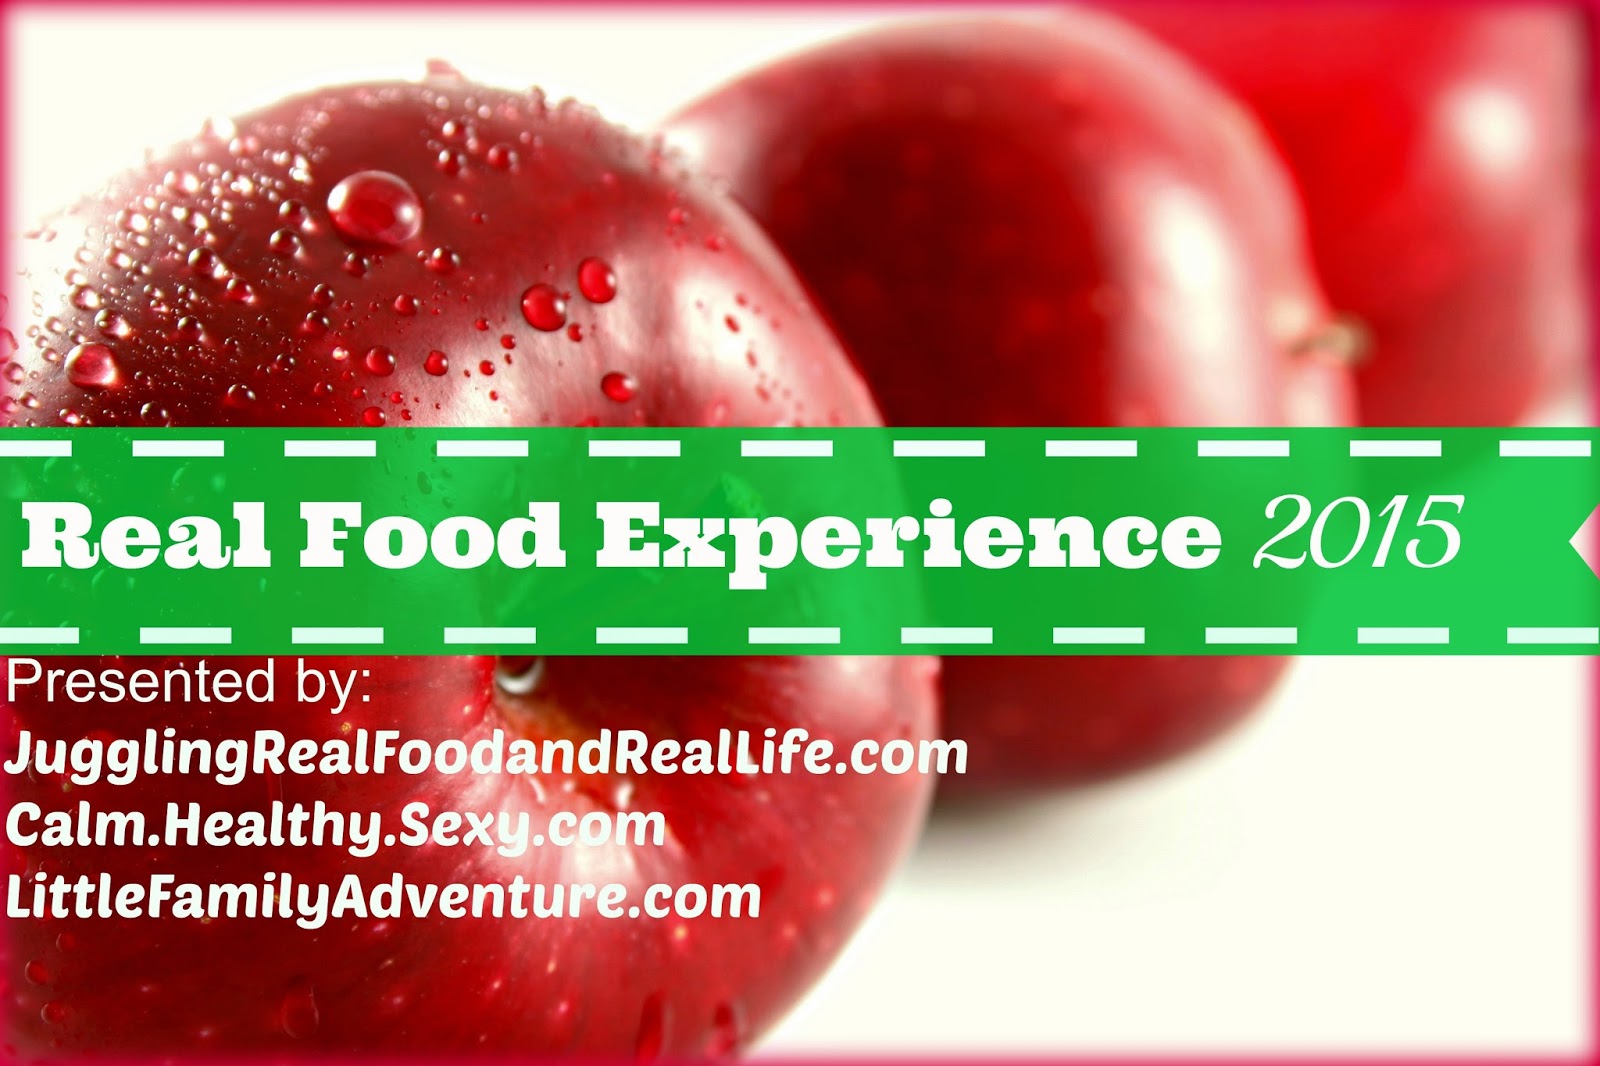 The Real Food Experience 2015 – Helping Families Transition to Real Food